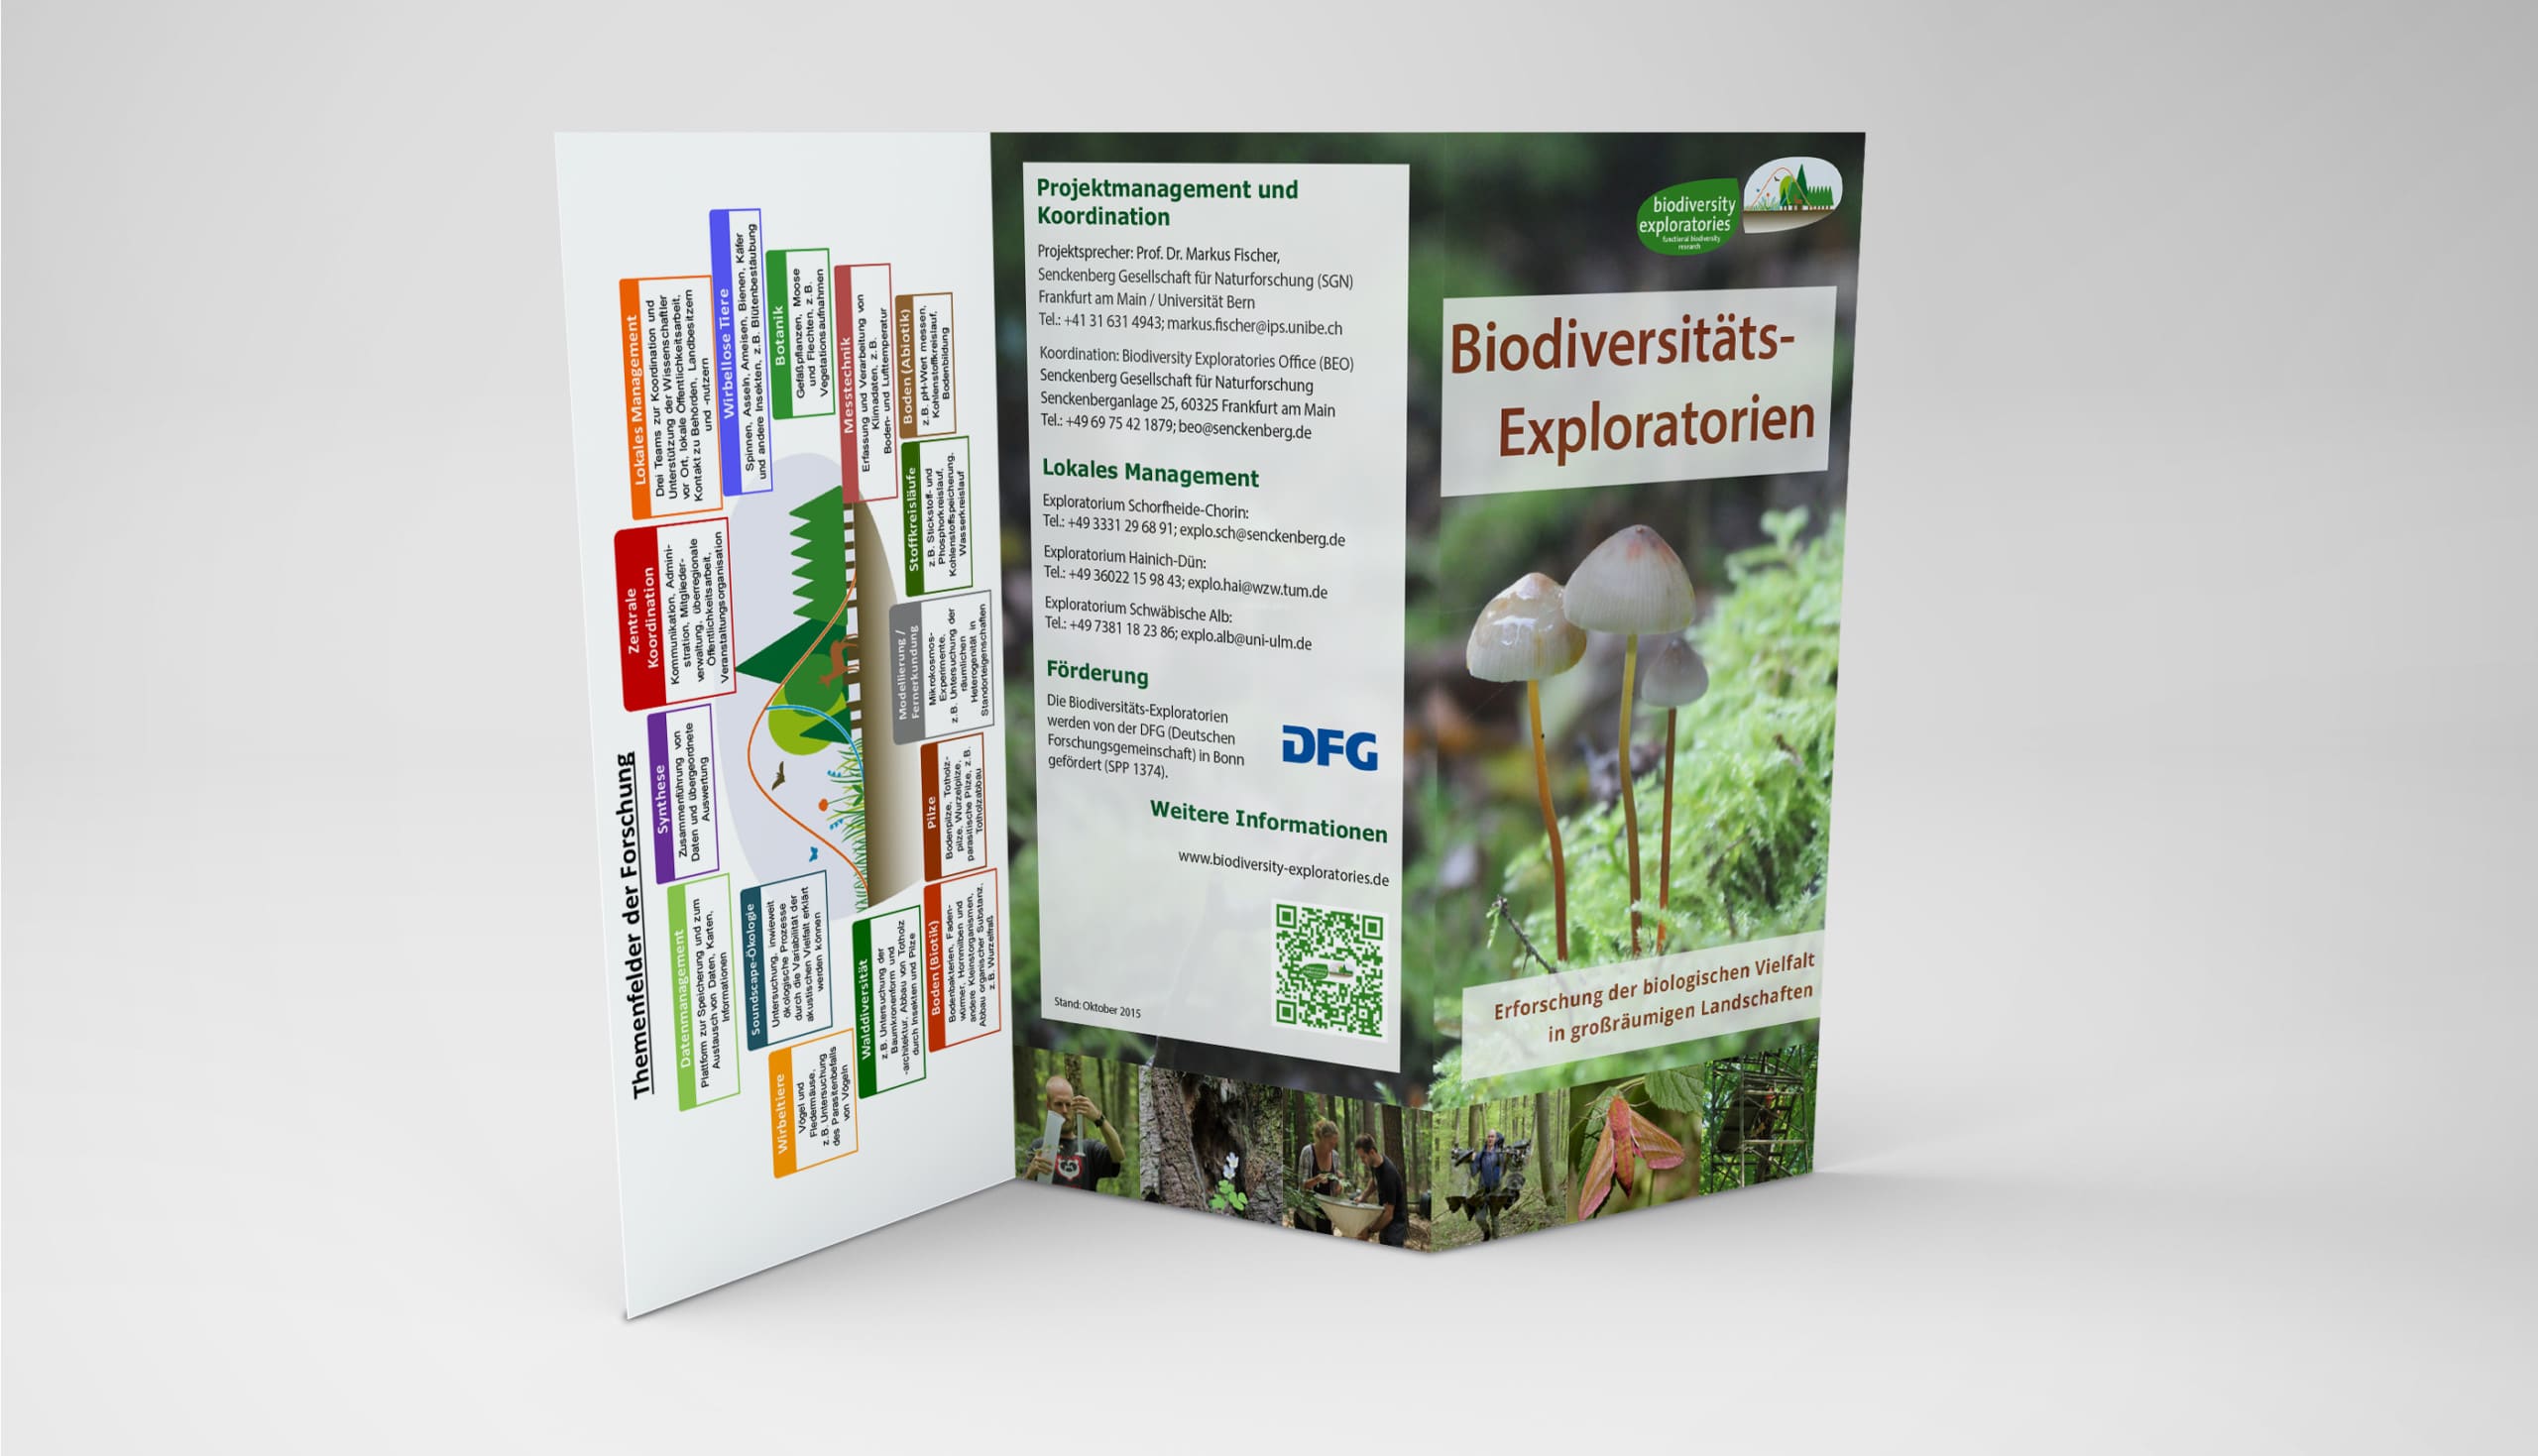 Picture: The photo shows a six-page flyer of the Biodiversity Exploratories in long DIN format.